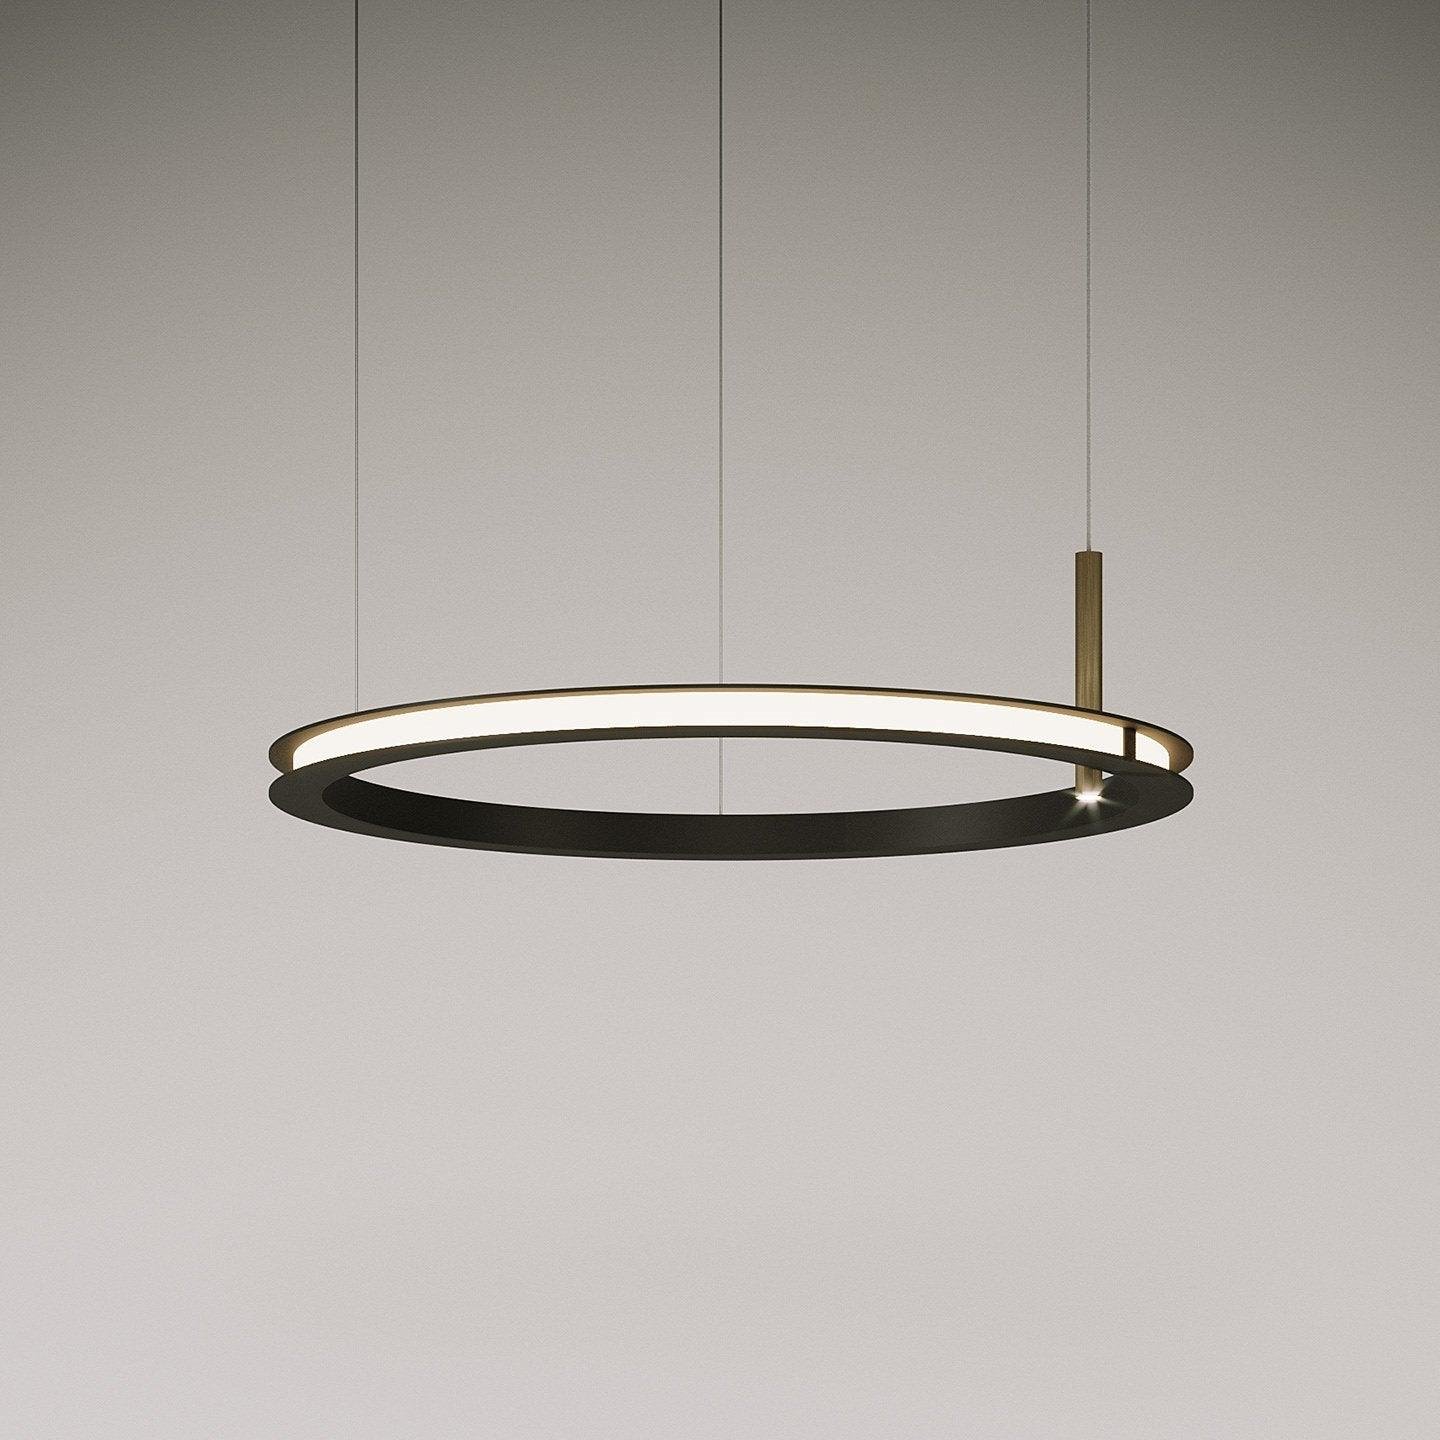 Black Cool Light Labilis Chandelier, measuring 31.5″ in diameter and 59″ in height (or 80cm x 150cm)